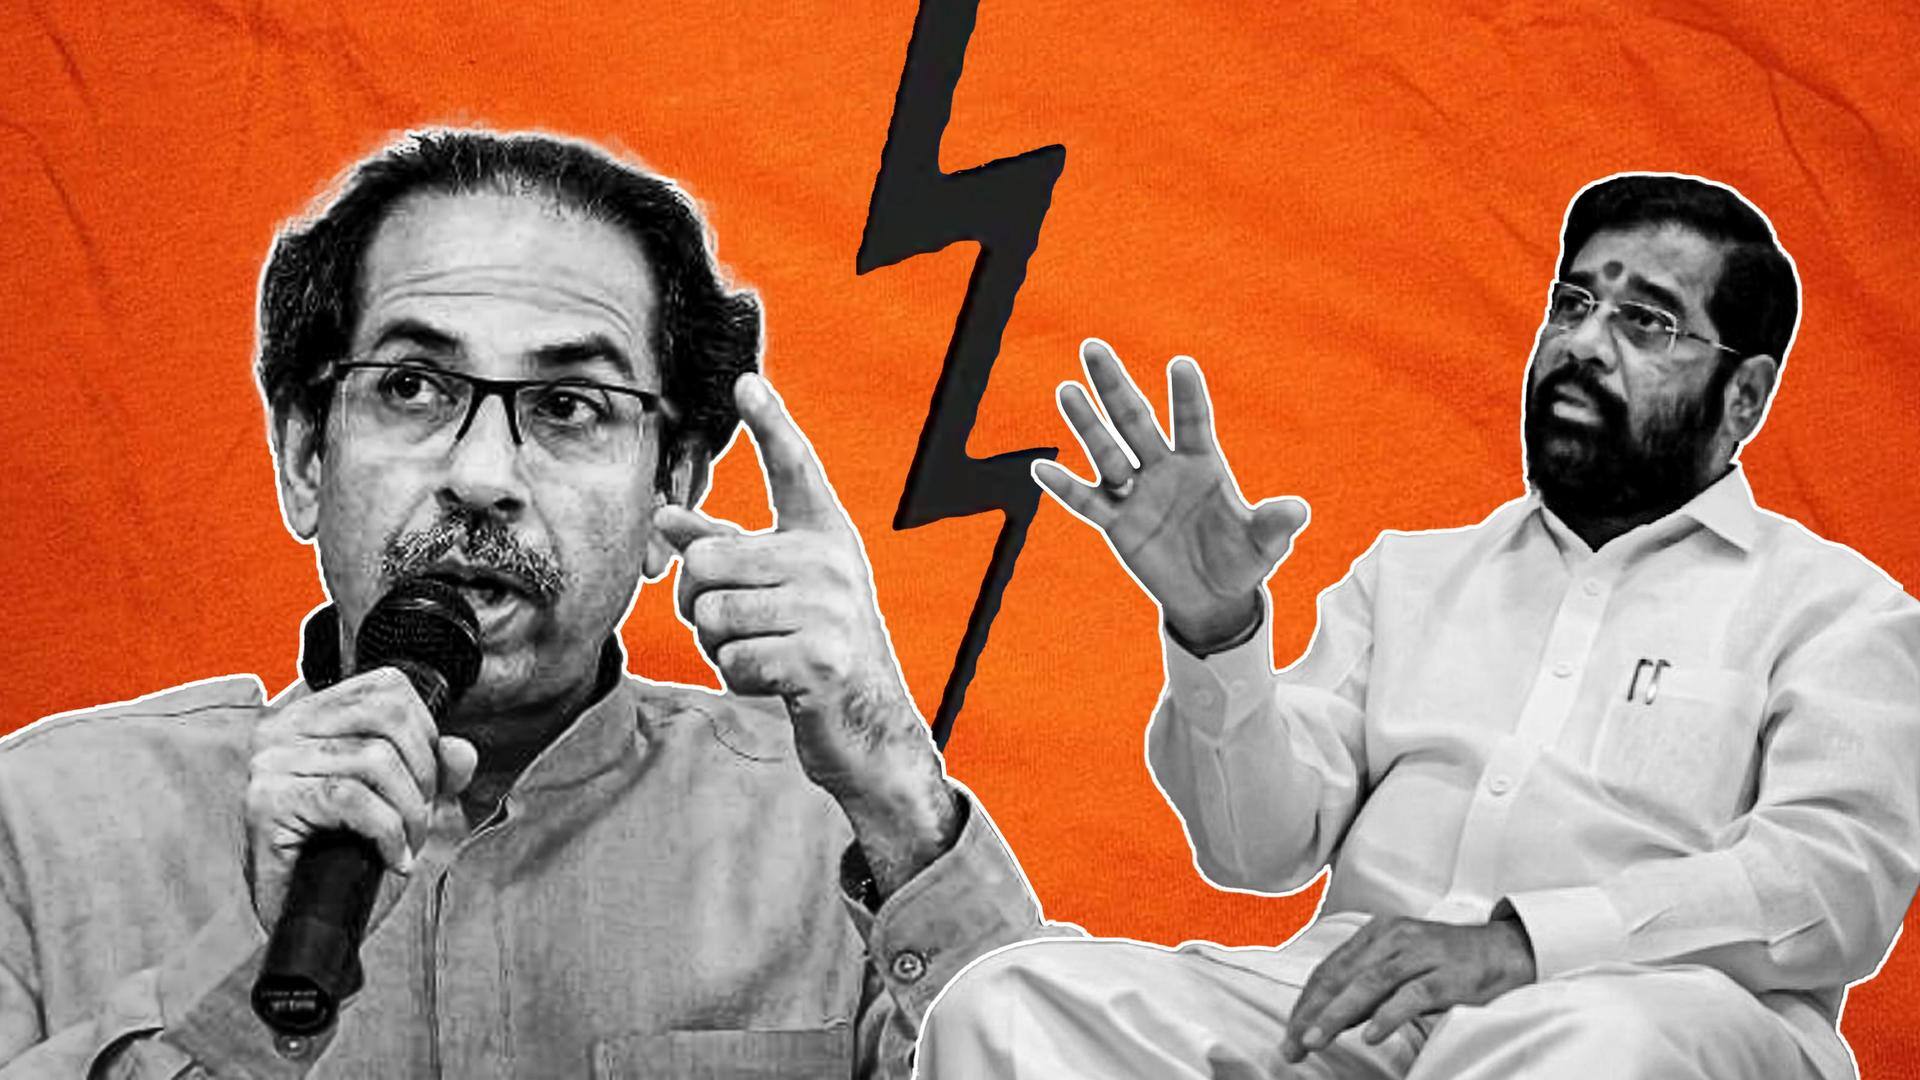 Shiv Sena row: Thackeray likely readying online battle with Shinde